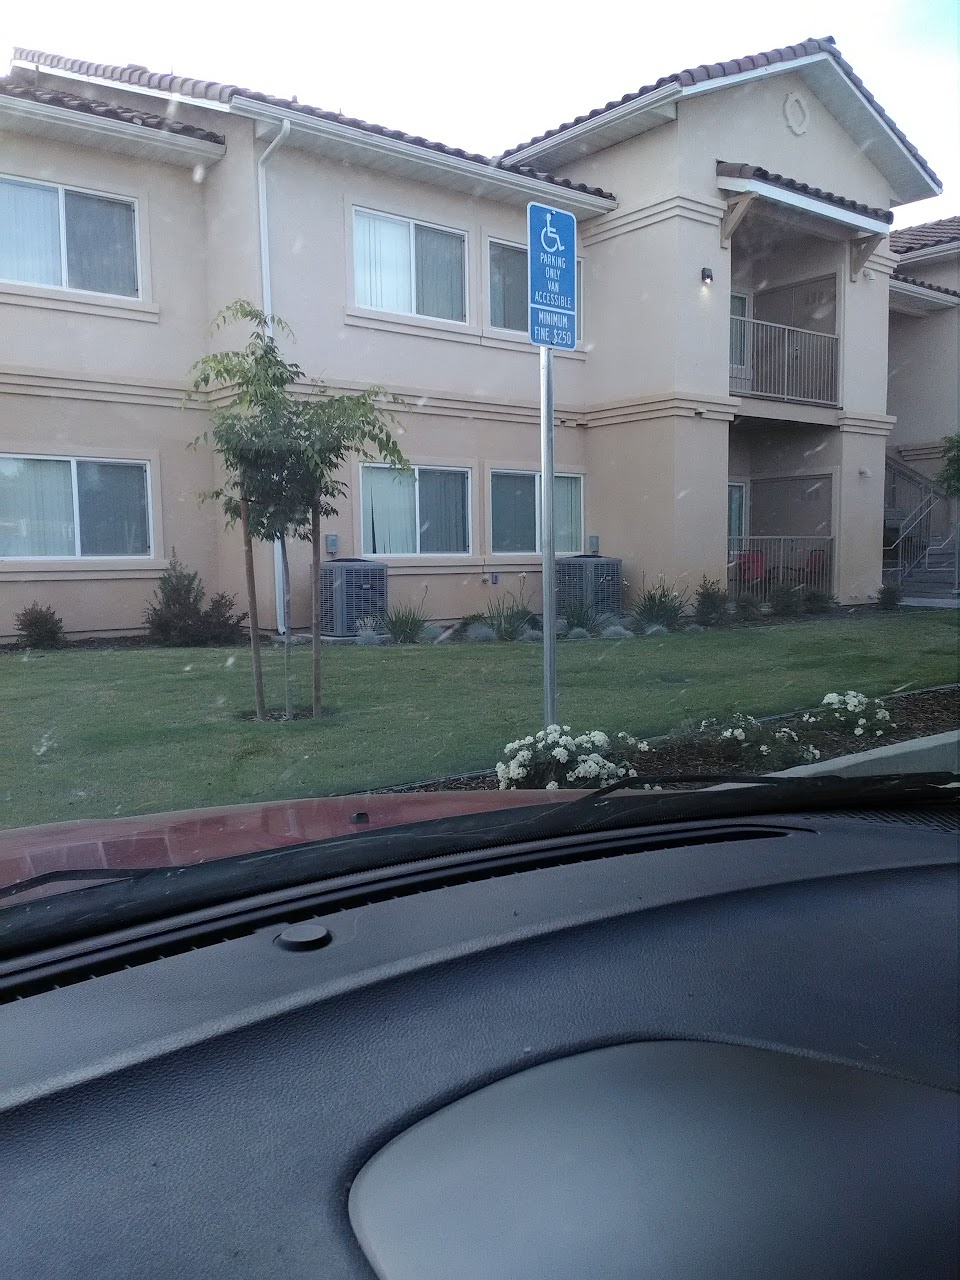 Photo of SANGER CROSSING APARTMENTS. Affordable housing located at 1620 J STREET SANGER, CA 93657